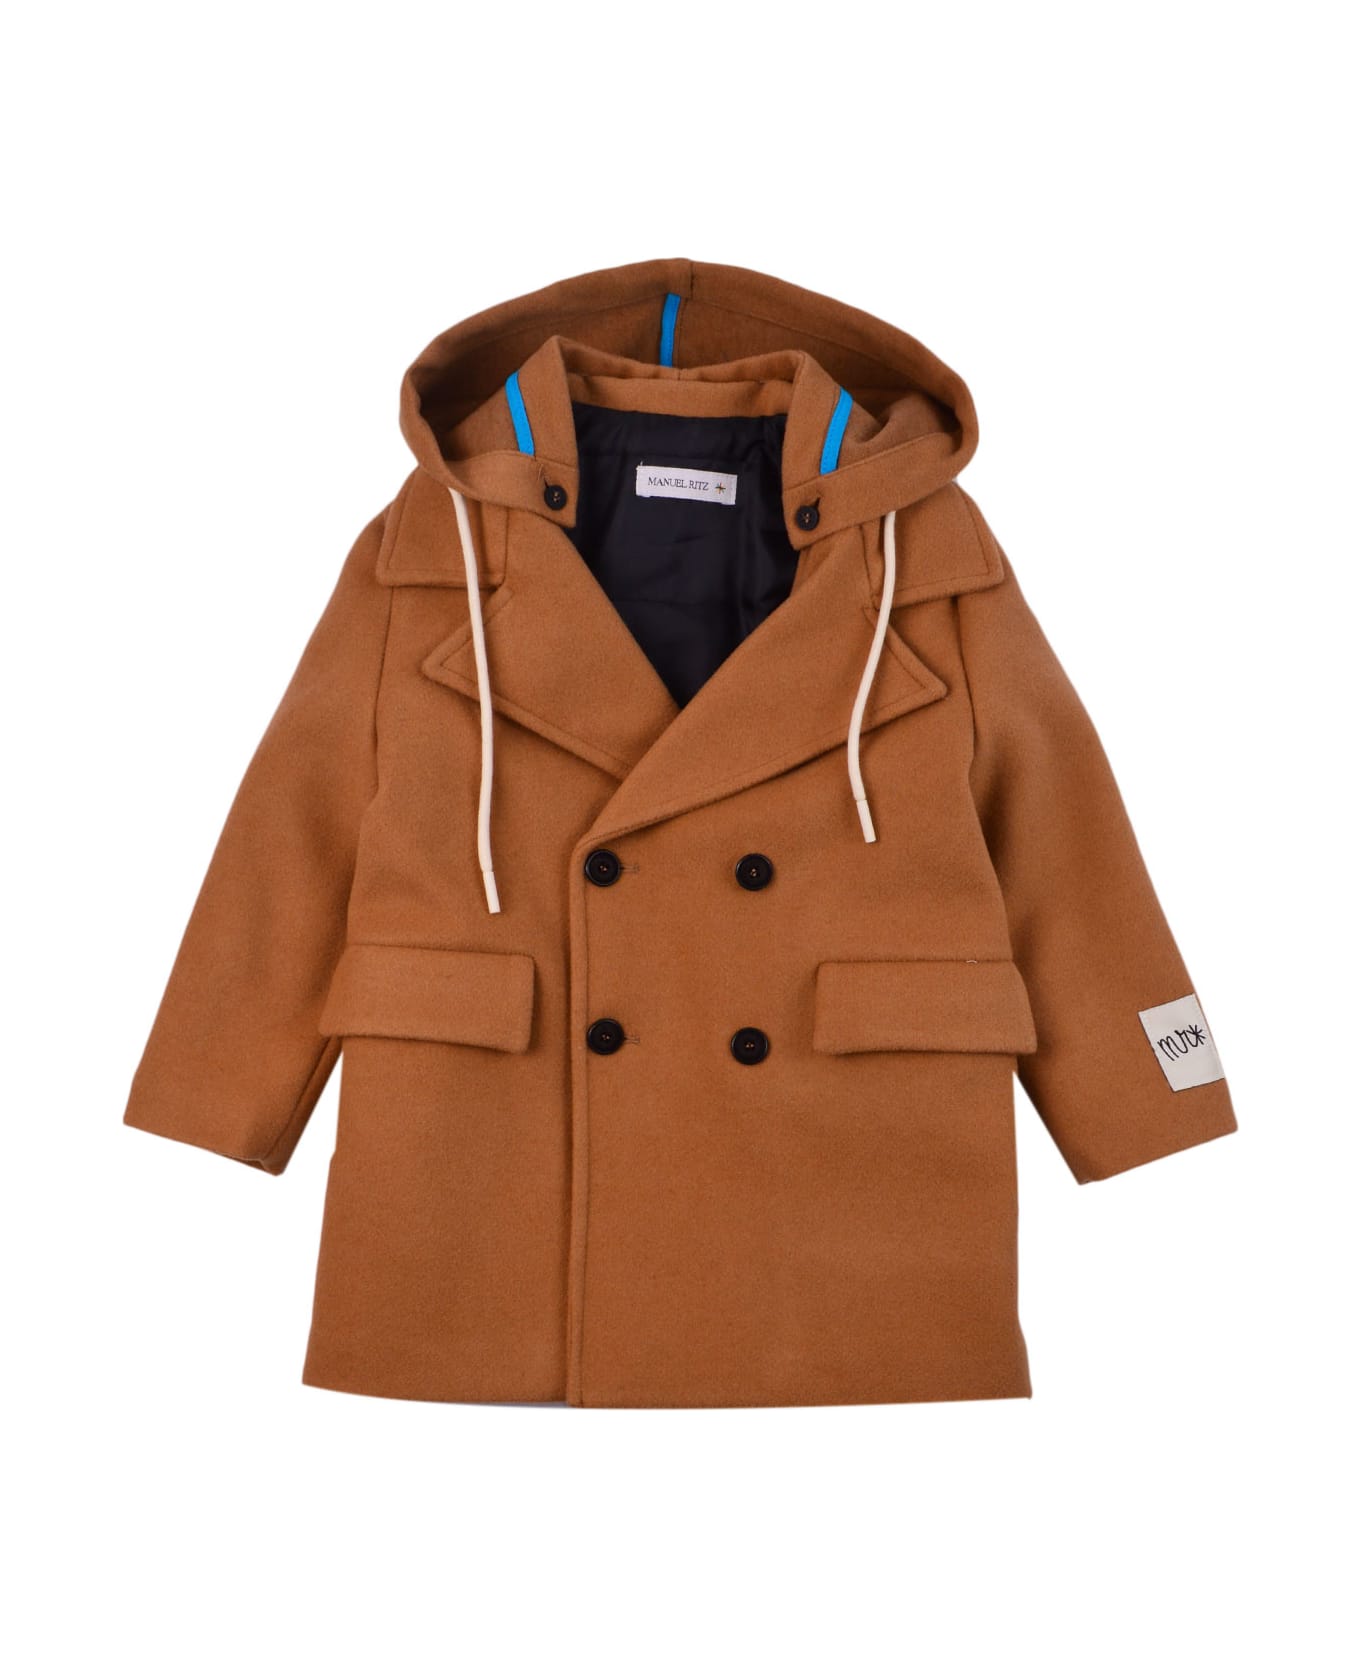 Manuel Ritz Double-breasted Coat - Brown